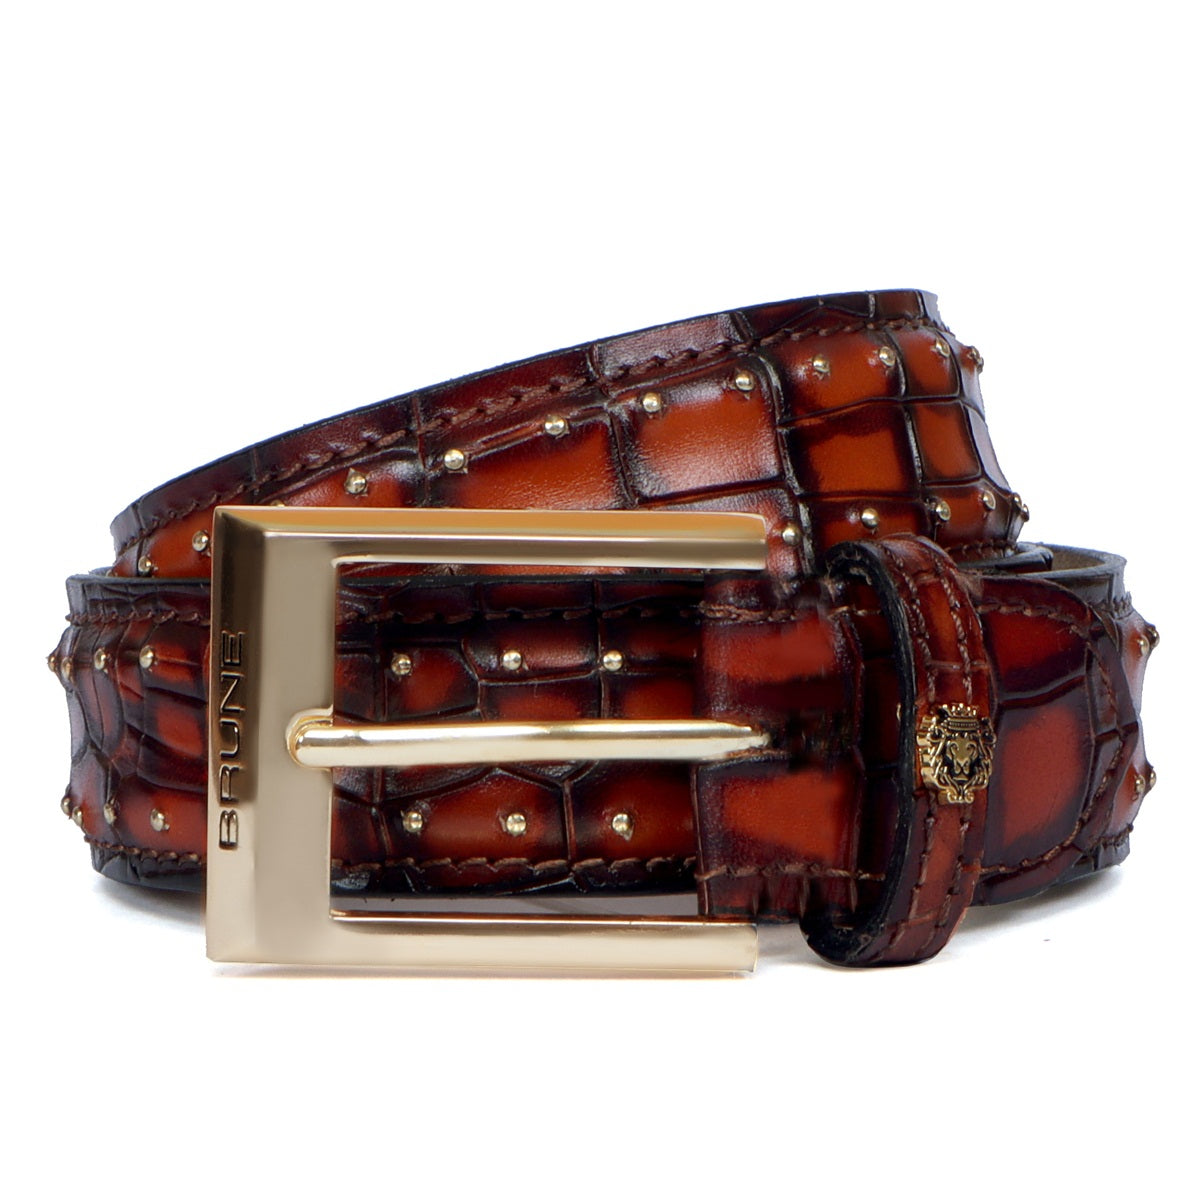 Men's Belt with Pint Sized Golden Studs Detailing Croco Textured Leather